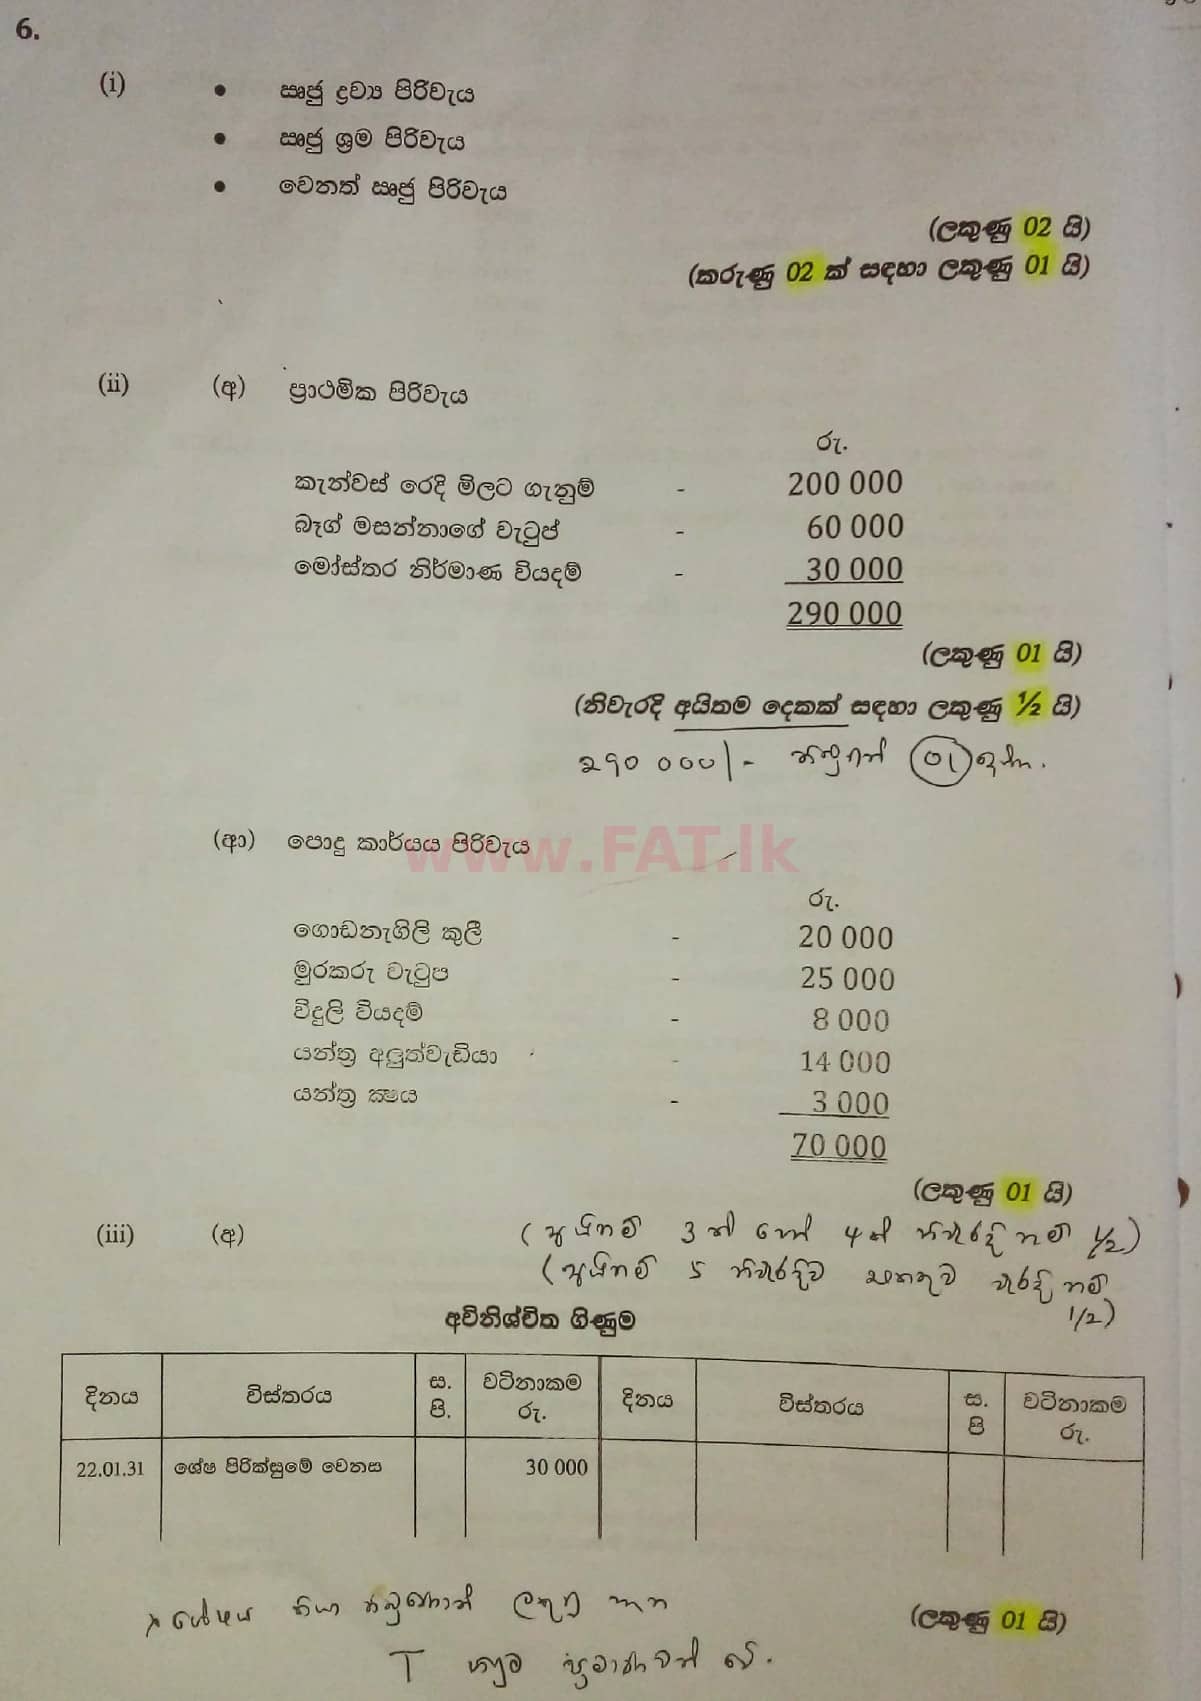 National Syllabus : Ordinary Level (O/L) Business and Accounting Studies - 2021 May - Paper II (සිංහල Medium) 6 5821